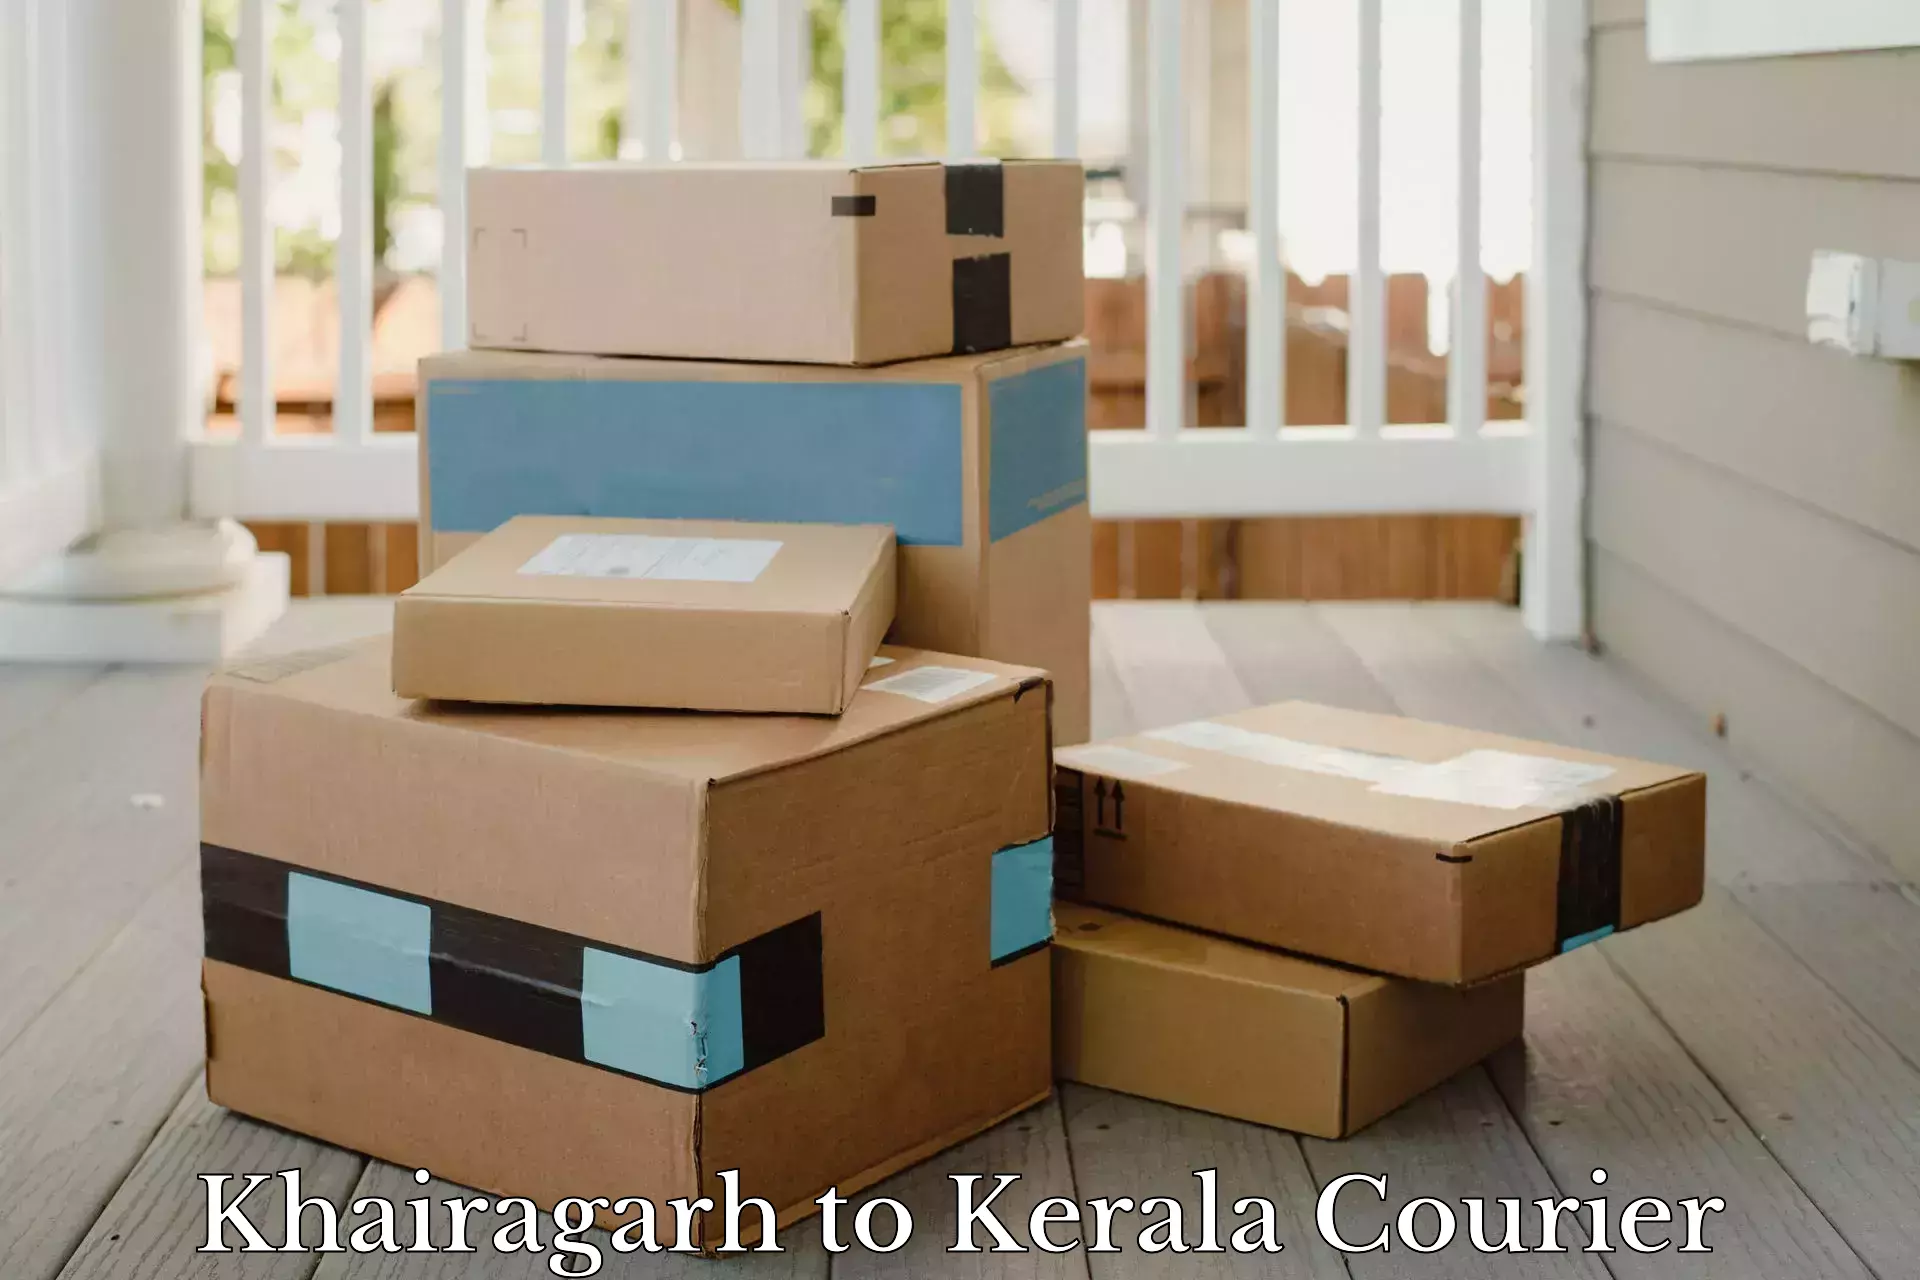 Same-day delivery solutions Khairagarh to Kerala